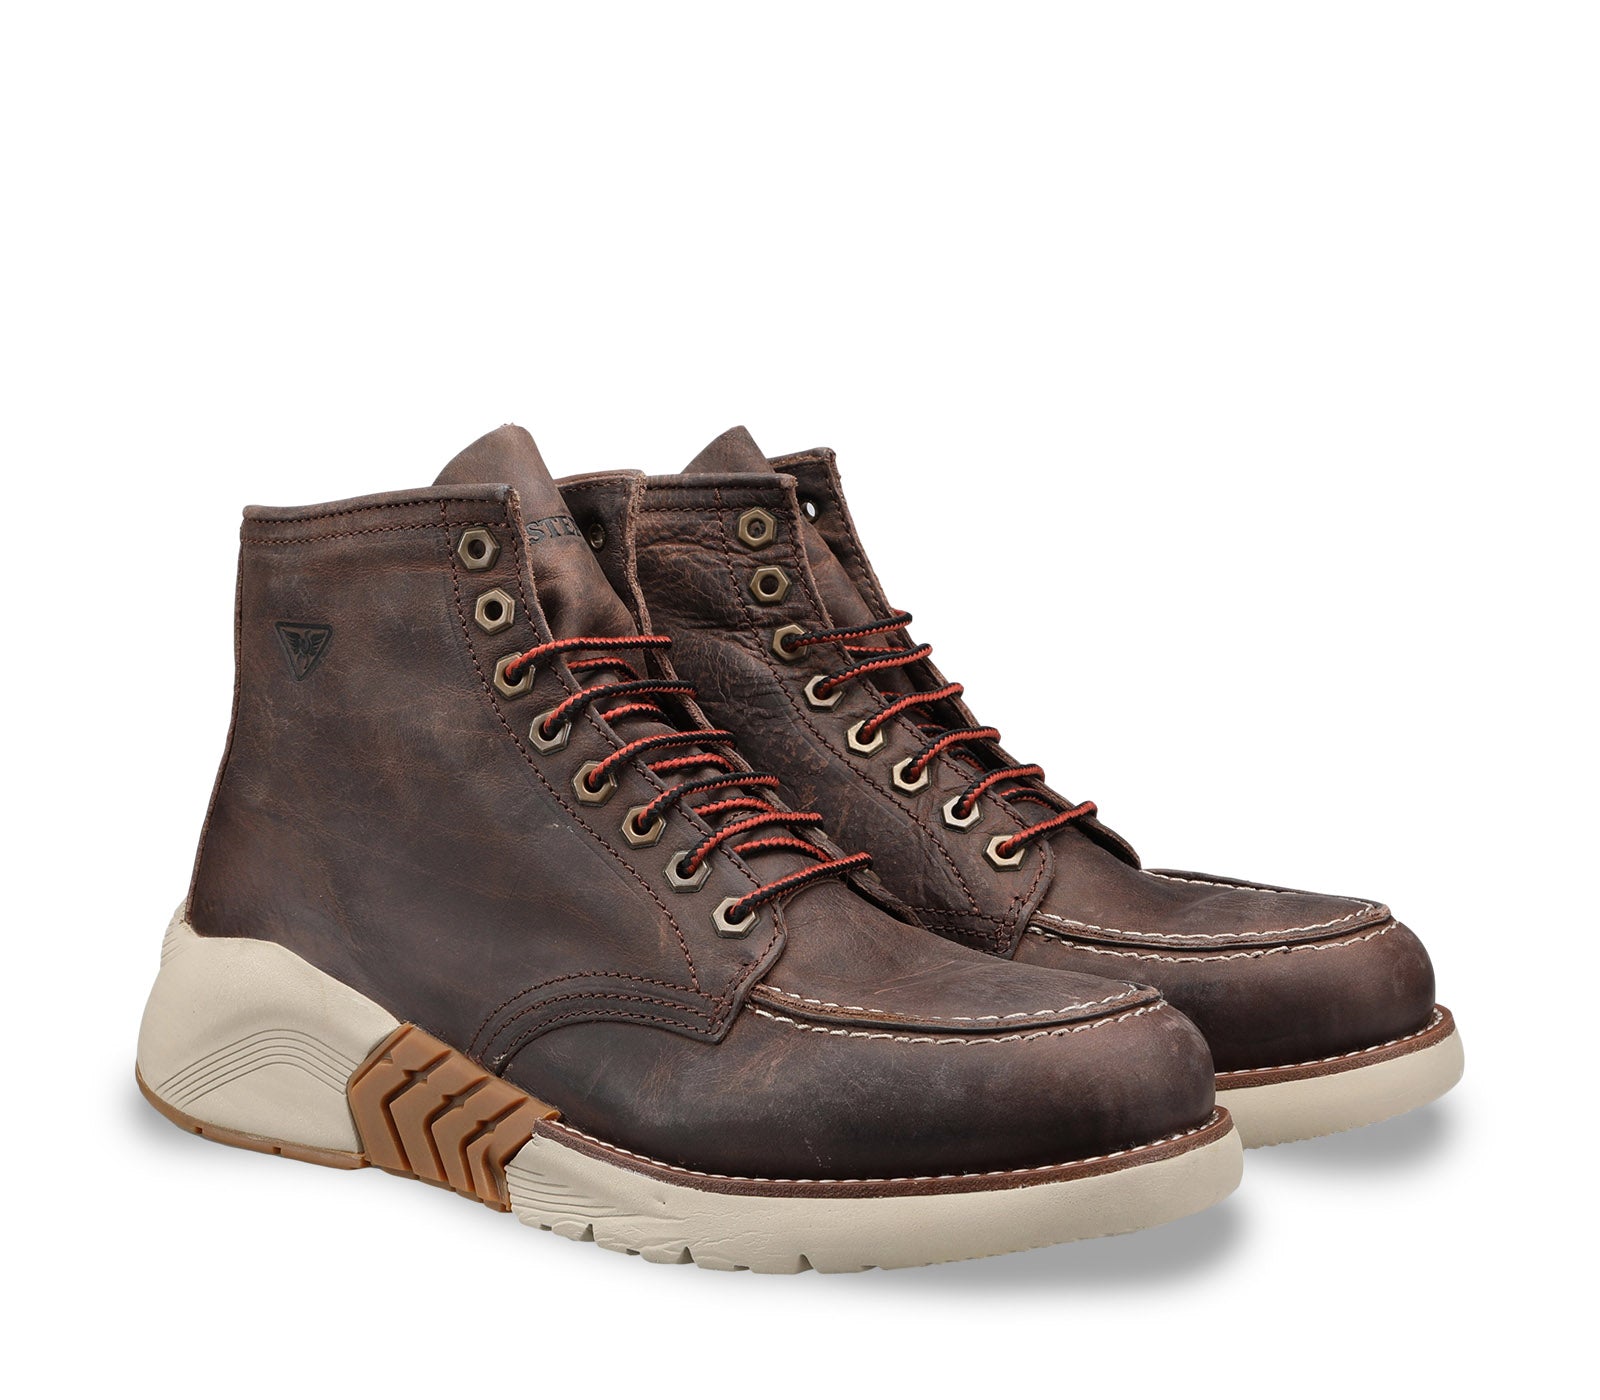 Dark Brown Men's Boot with Strings and White Sports Sole